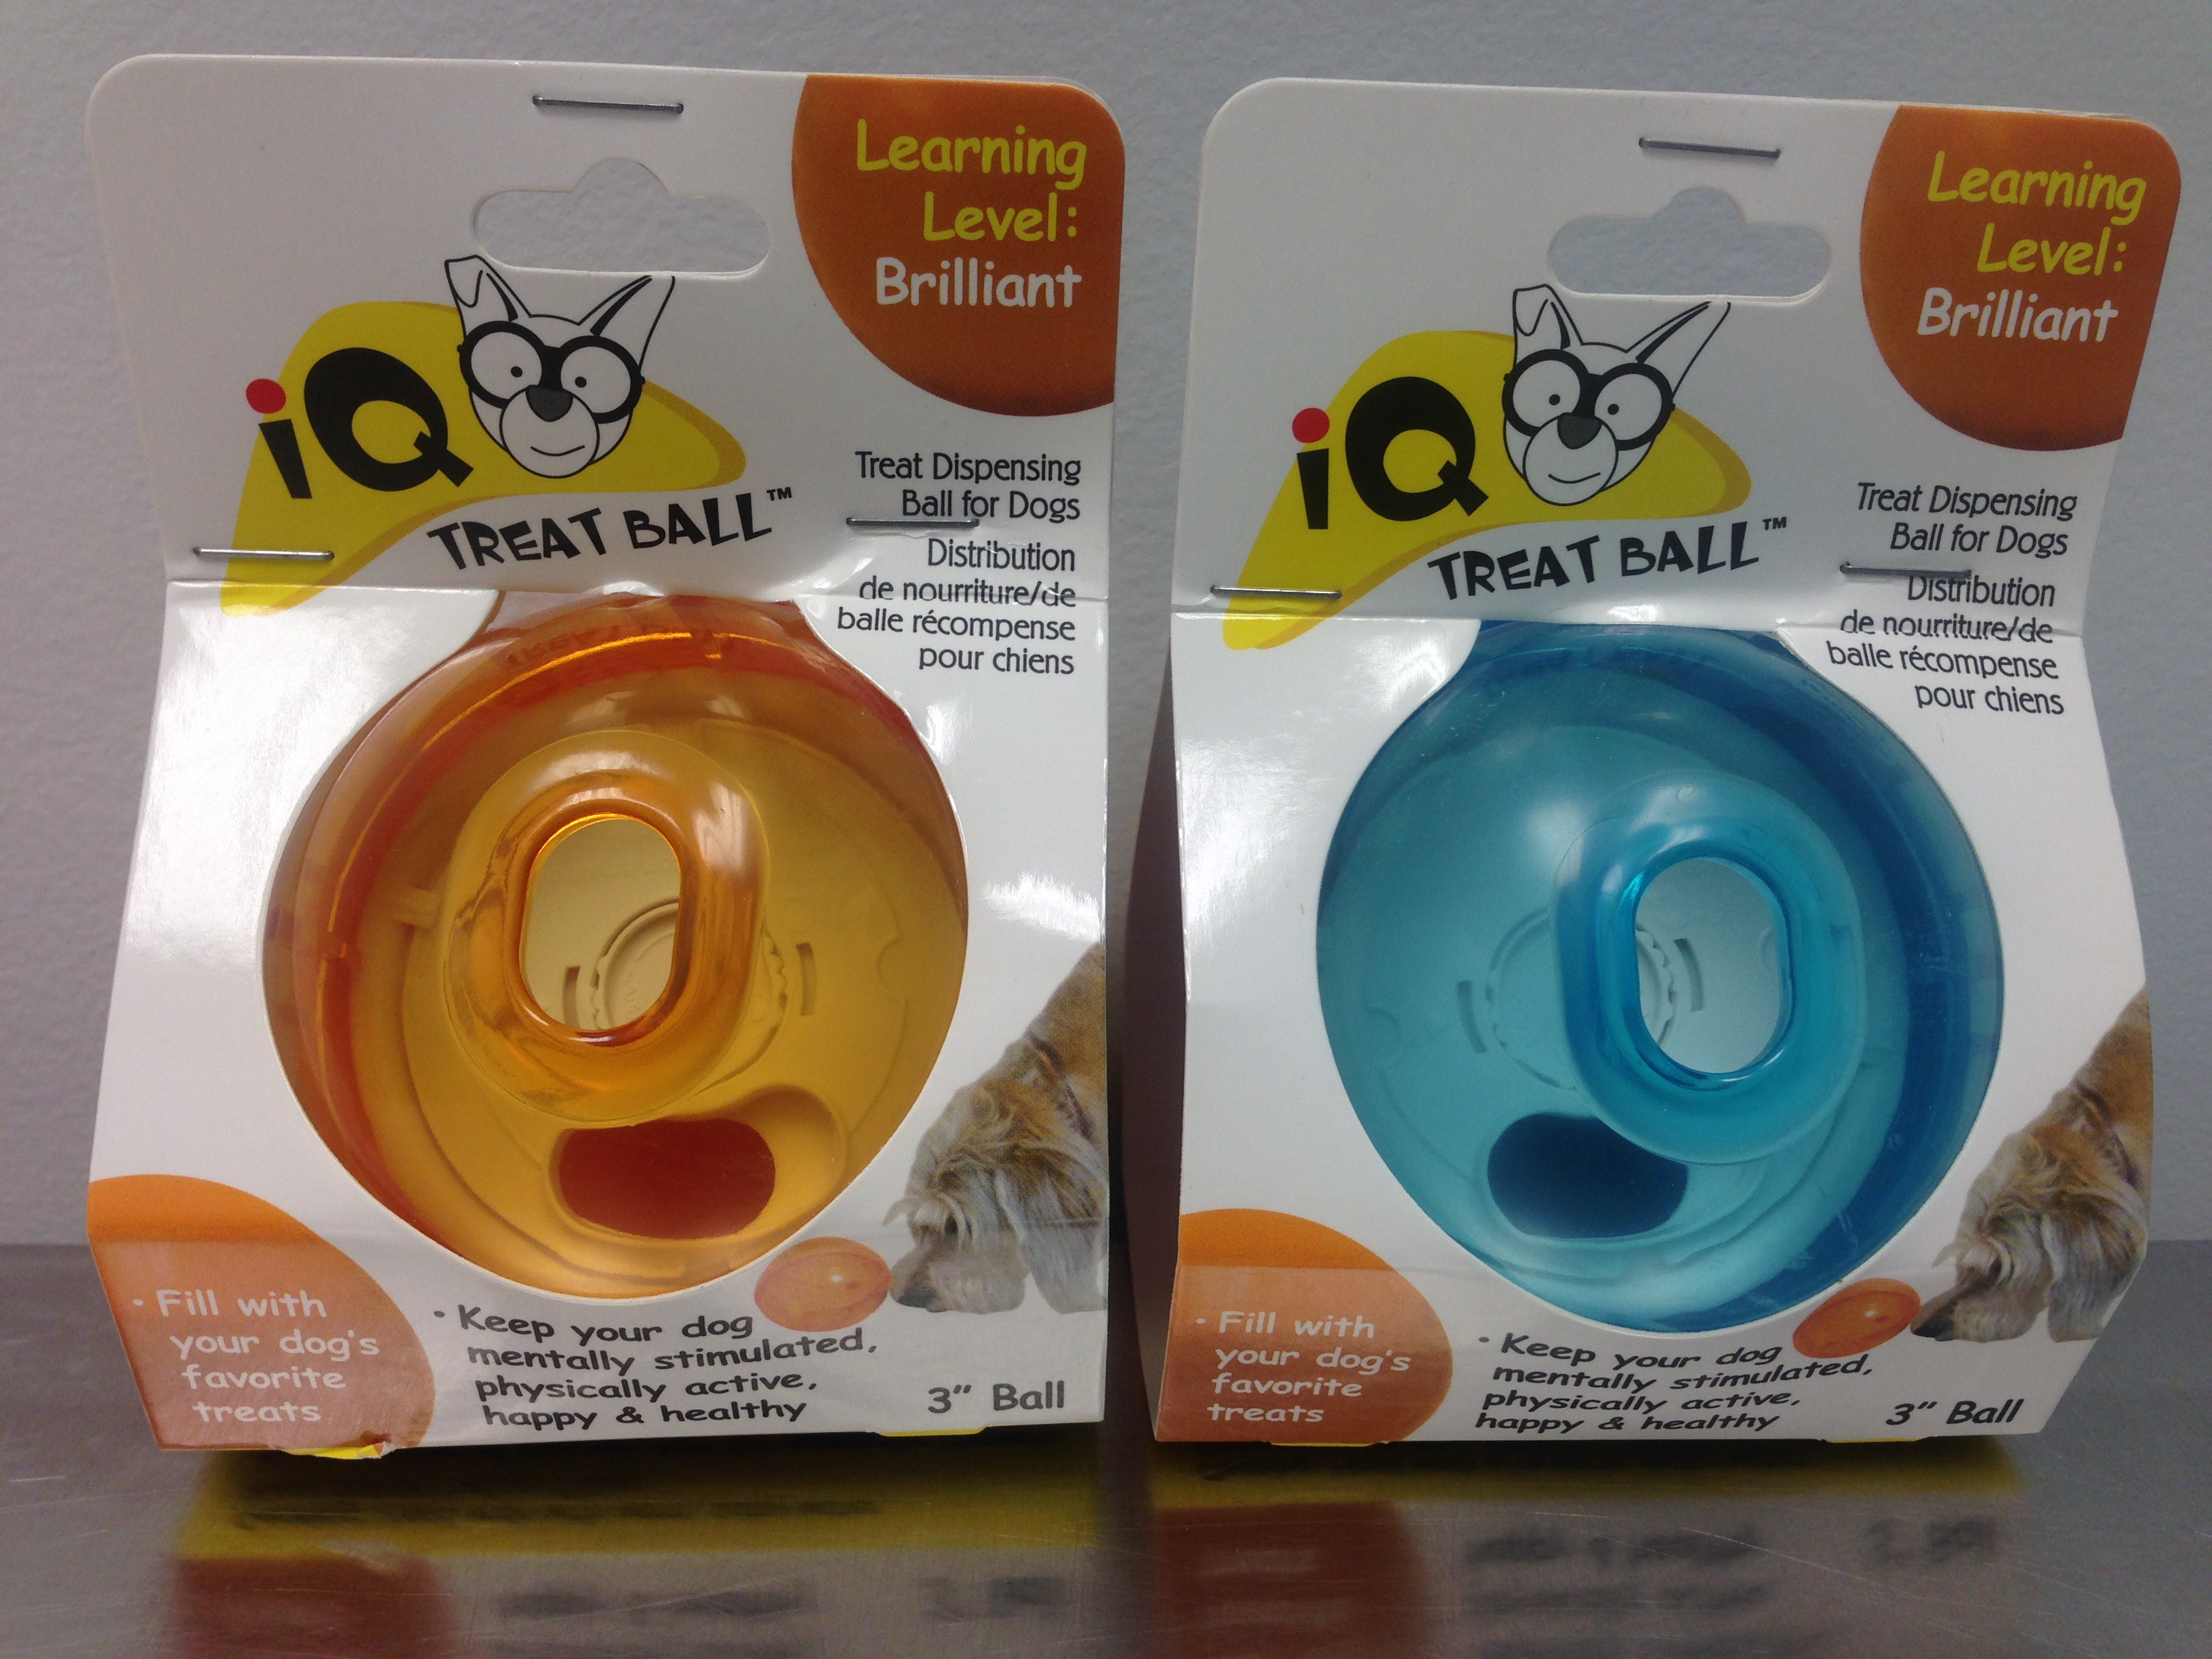 IQ Treat Ball by Our Pets (yes, this is a dog toy!) - - Food